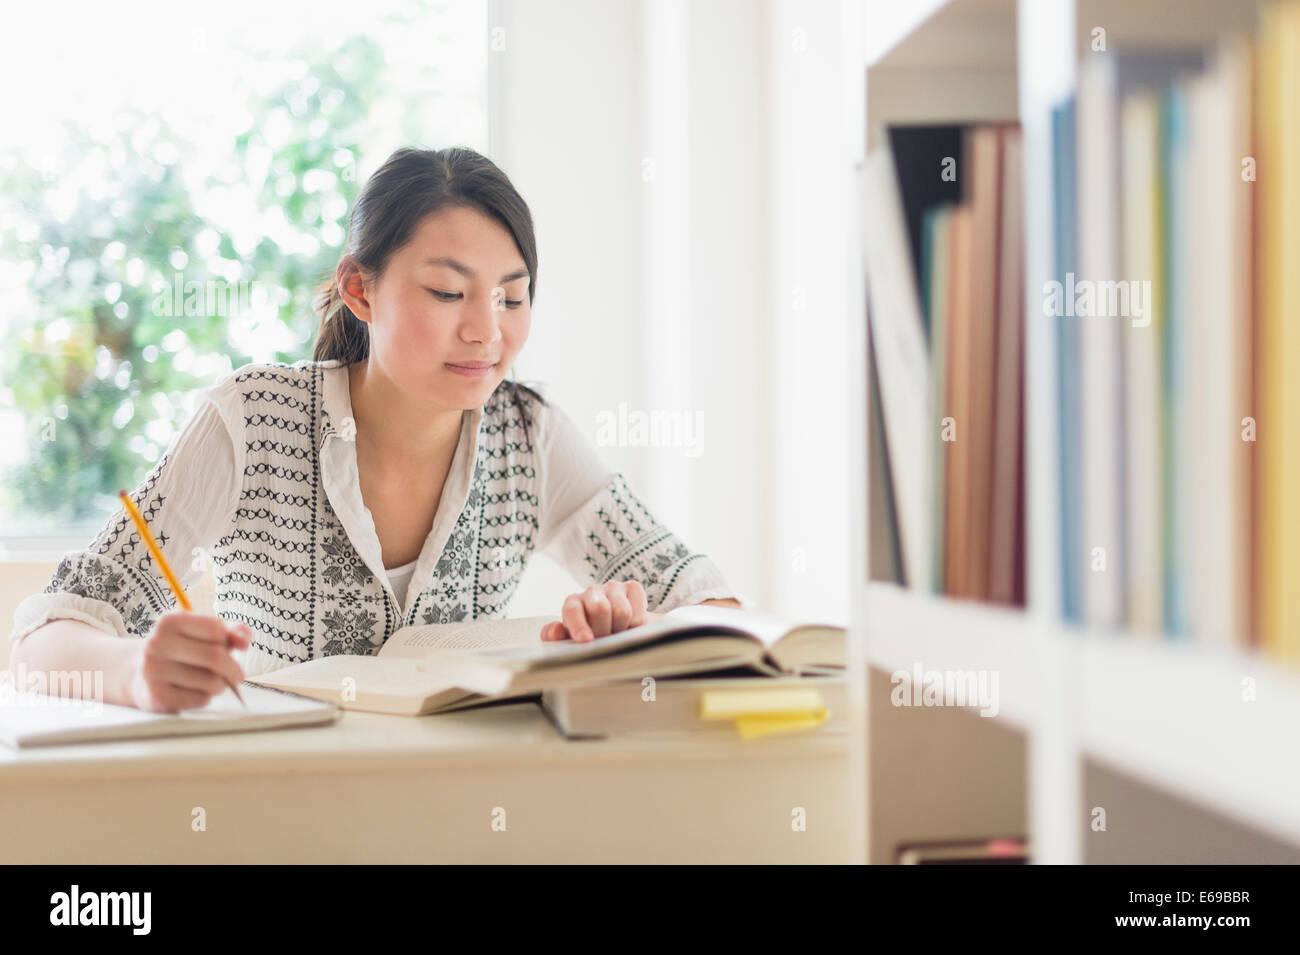 Mixed race teenage girl studying in library Stock Photo